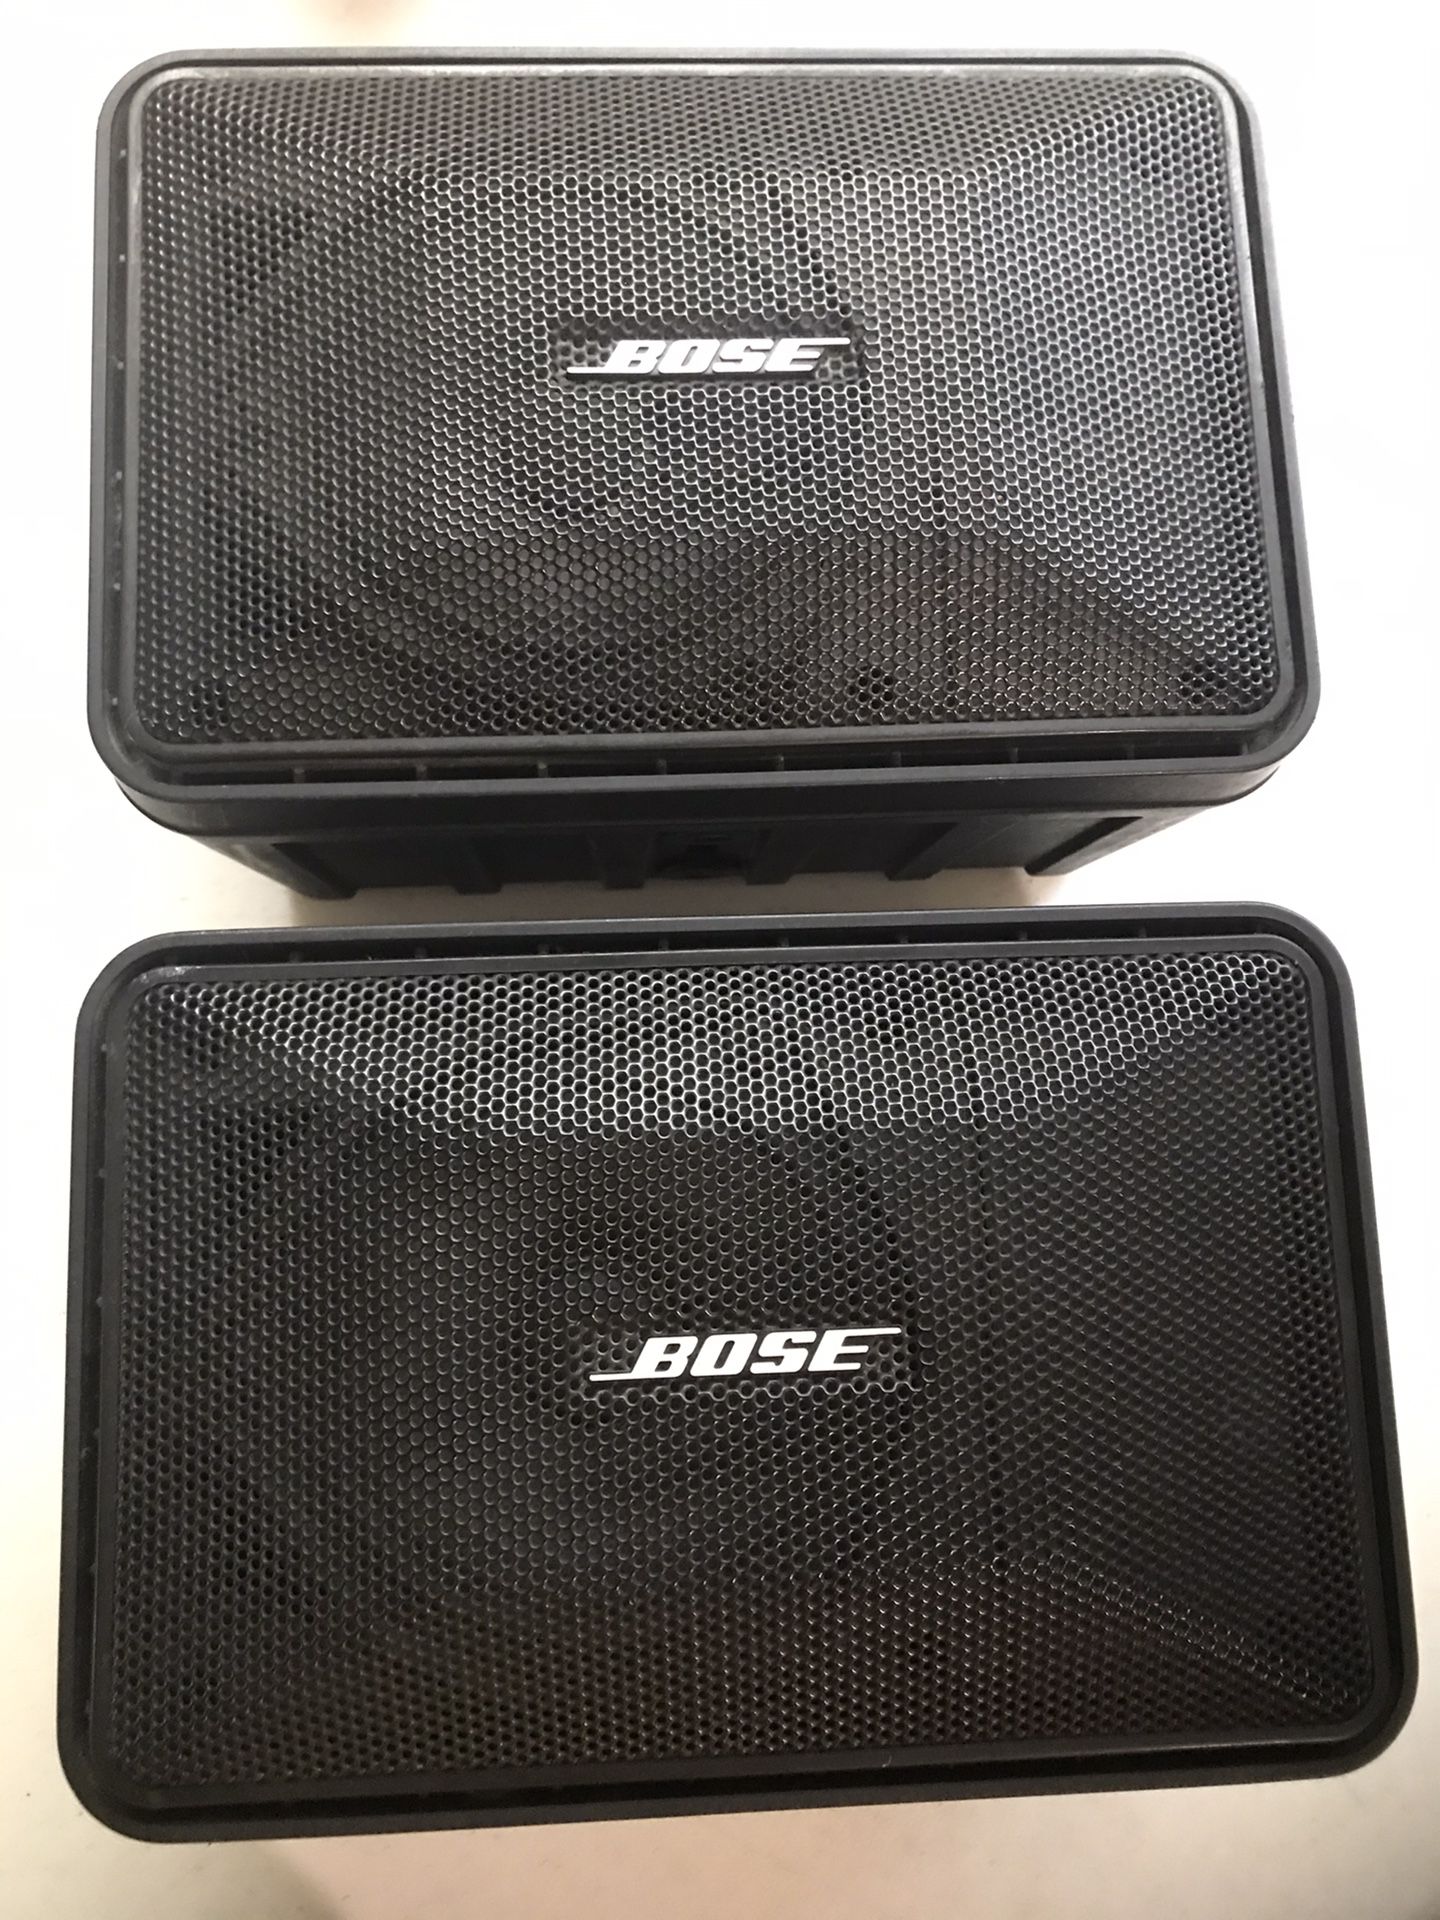 BOSE: model 101 music monitor. Speaker. Perfect condition. Work very well.